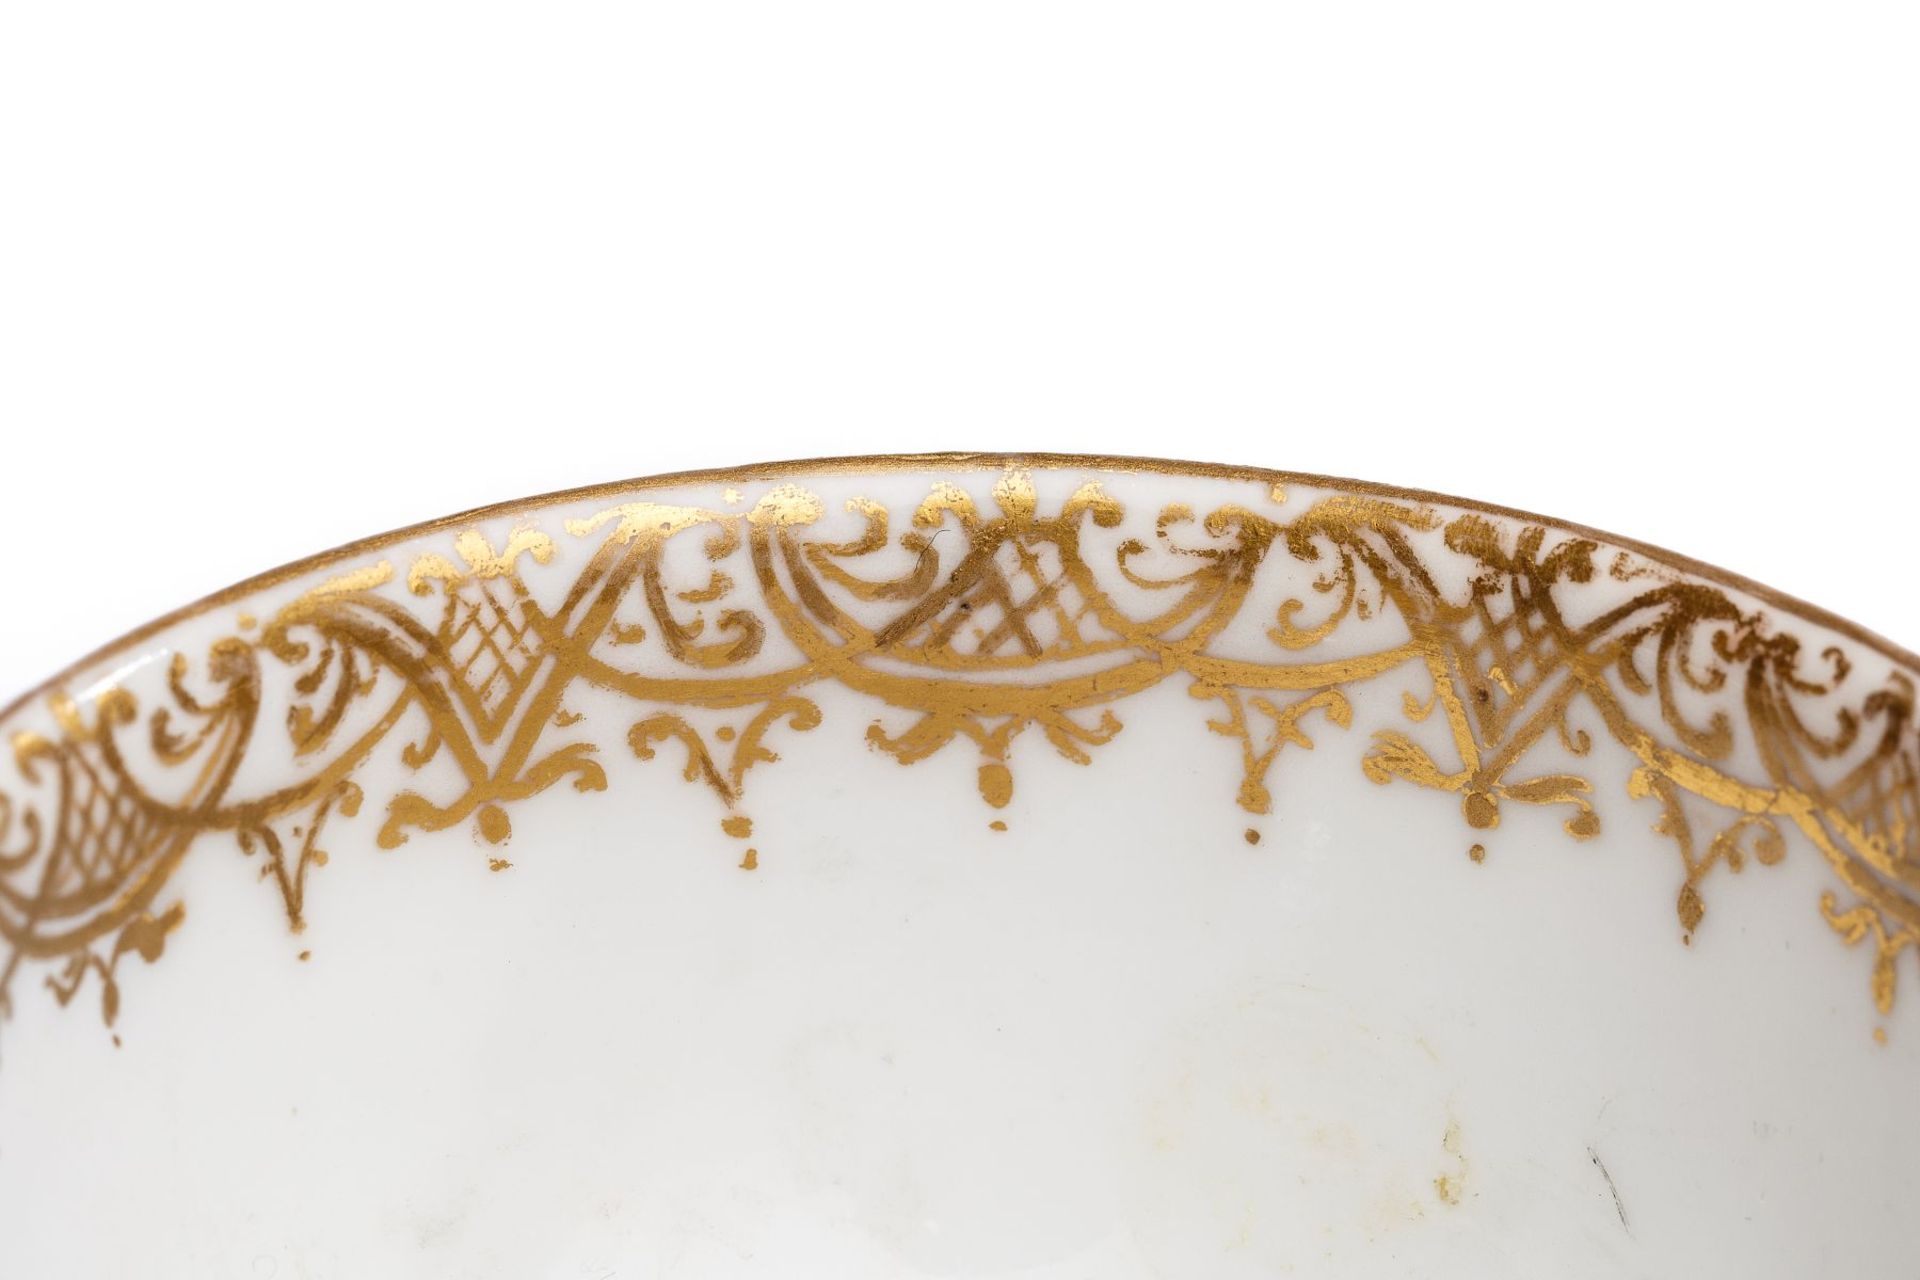 Bowl without Saucer, Meissen 1739 - Image 2 of 4